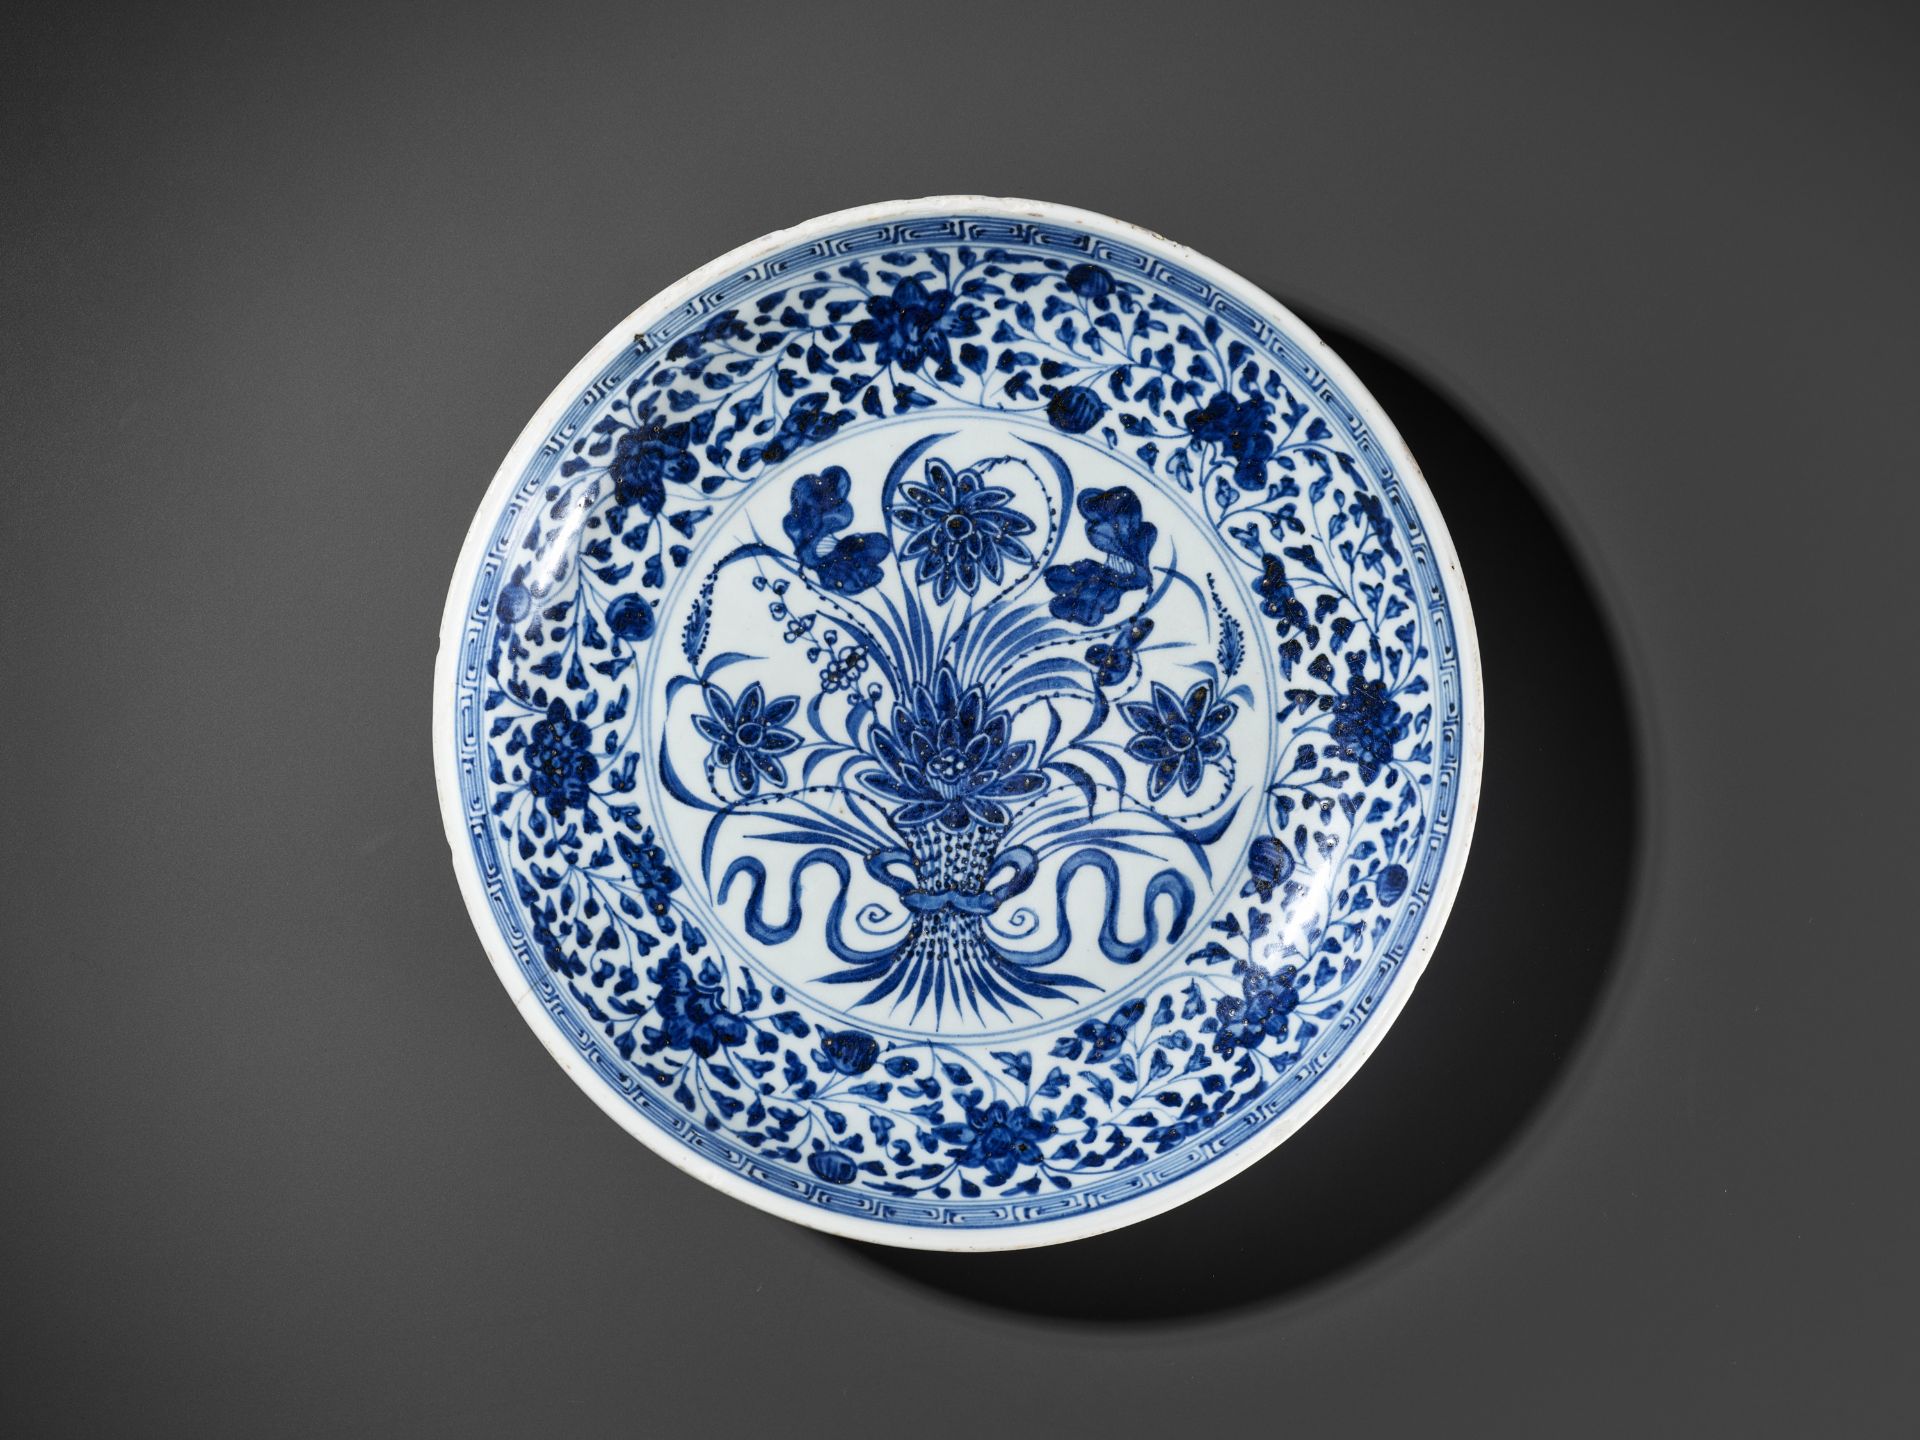 A MING-STYLE BLUE AND WHITE 'LOTUS BOUQUET' DISH, 18TH CENTURY - Image 8 of 8